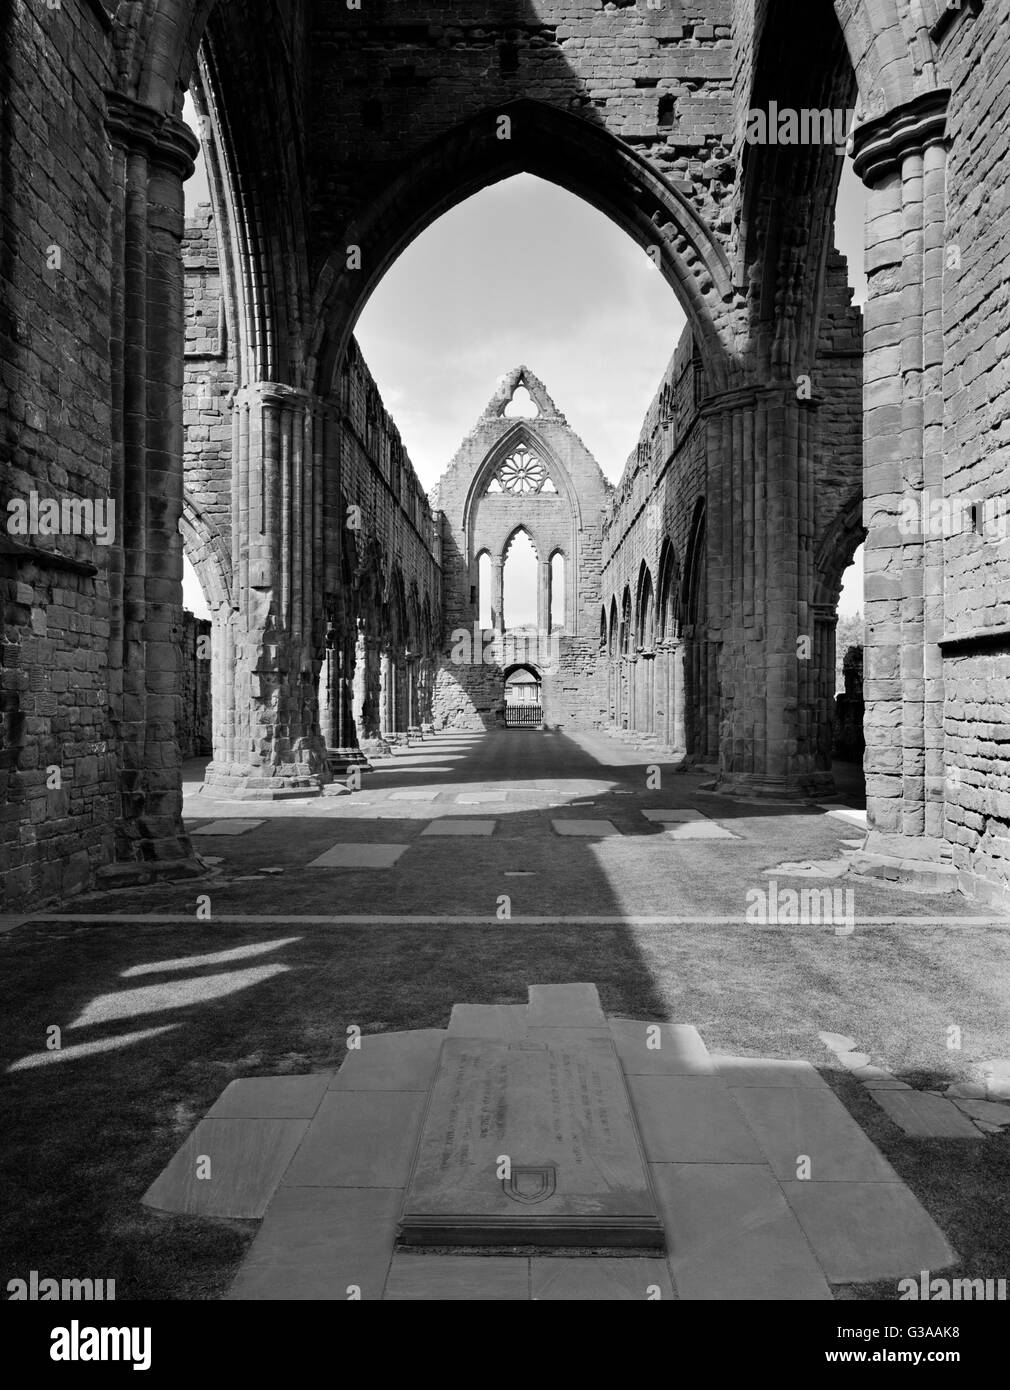 Looking W at the crossing & nave of Sweetheart Abbey church from the chancel: built of red Nithsdale sandstone. Founded in 1273 by Lady Dervorgilla. Stock Photo